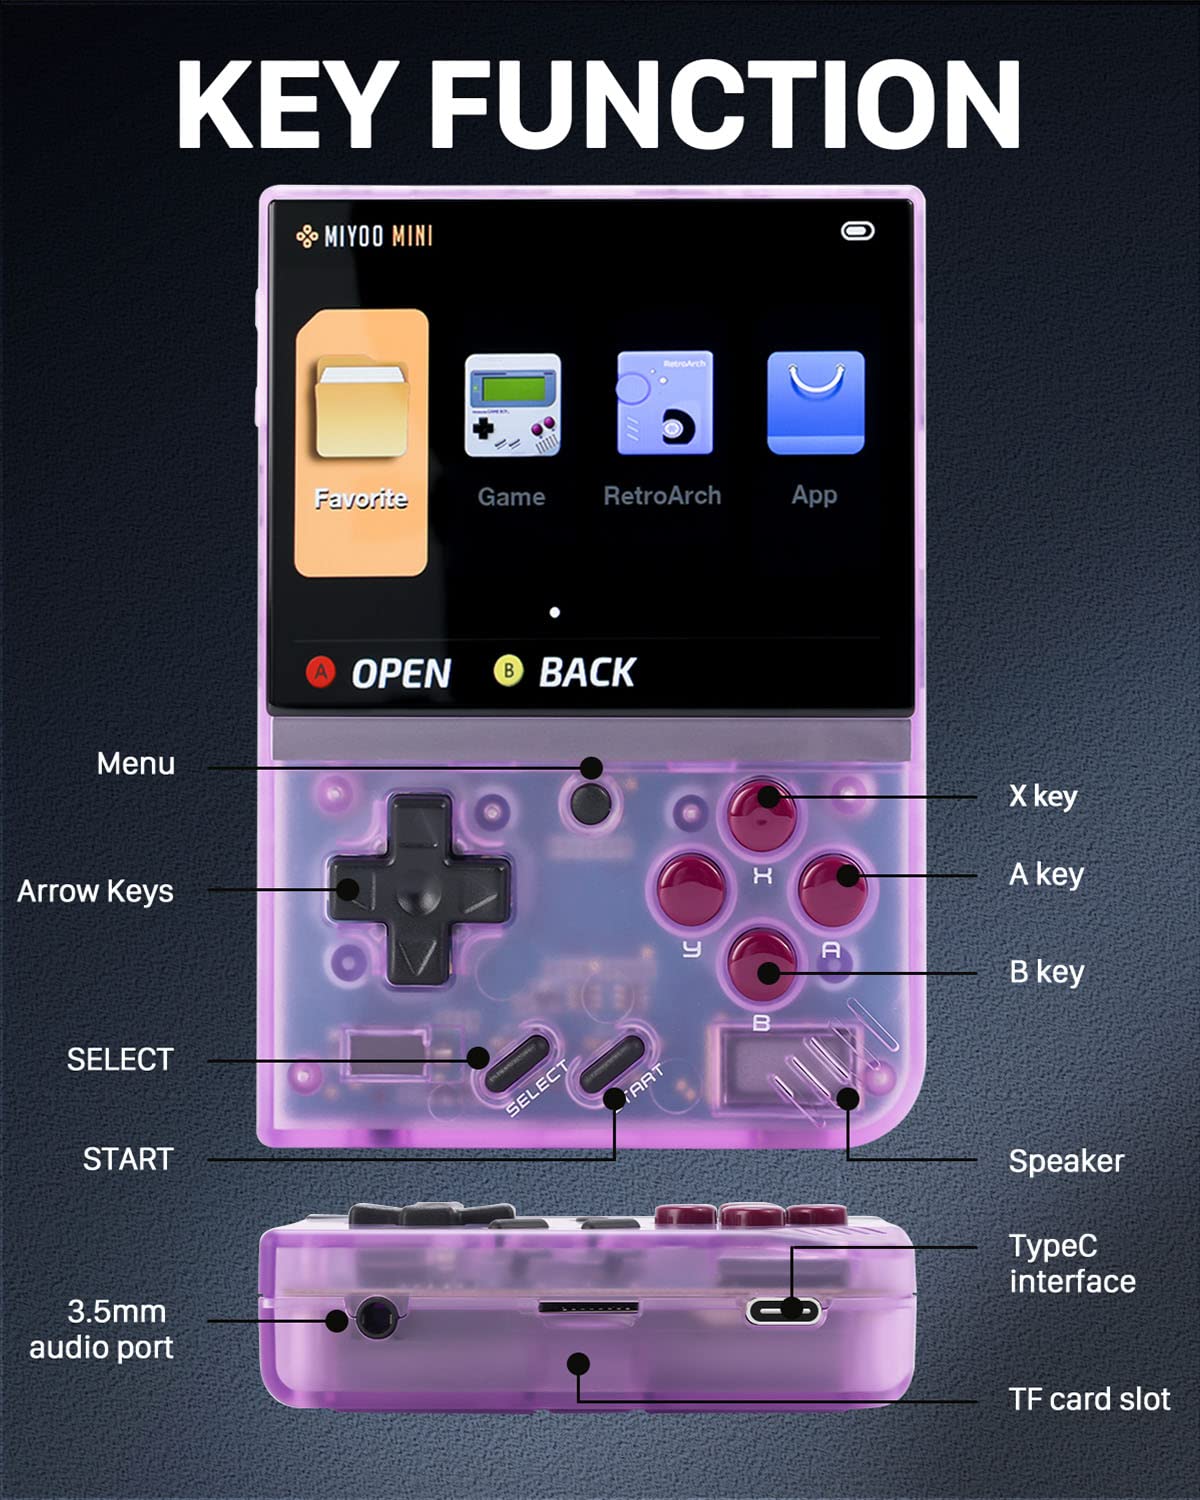 Miyoo Mini Plus,Retro Handheld Game Console with 64G TF Card,Support 10000+Games,3.5-inch Portable Rechargeable Open Source Game Console Emulator with Storage Case,Support WiFi.(Purple)